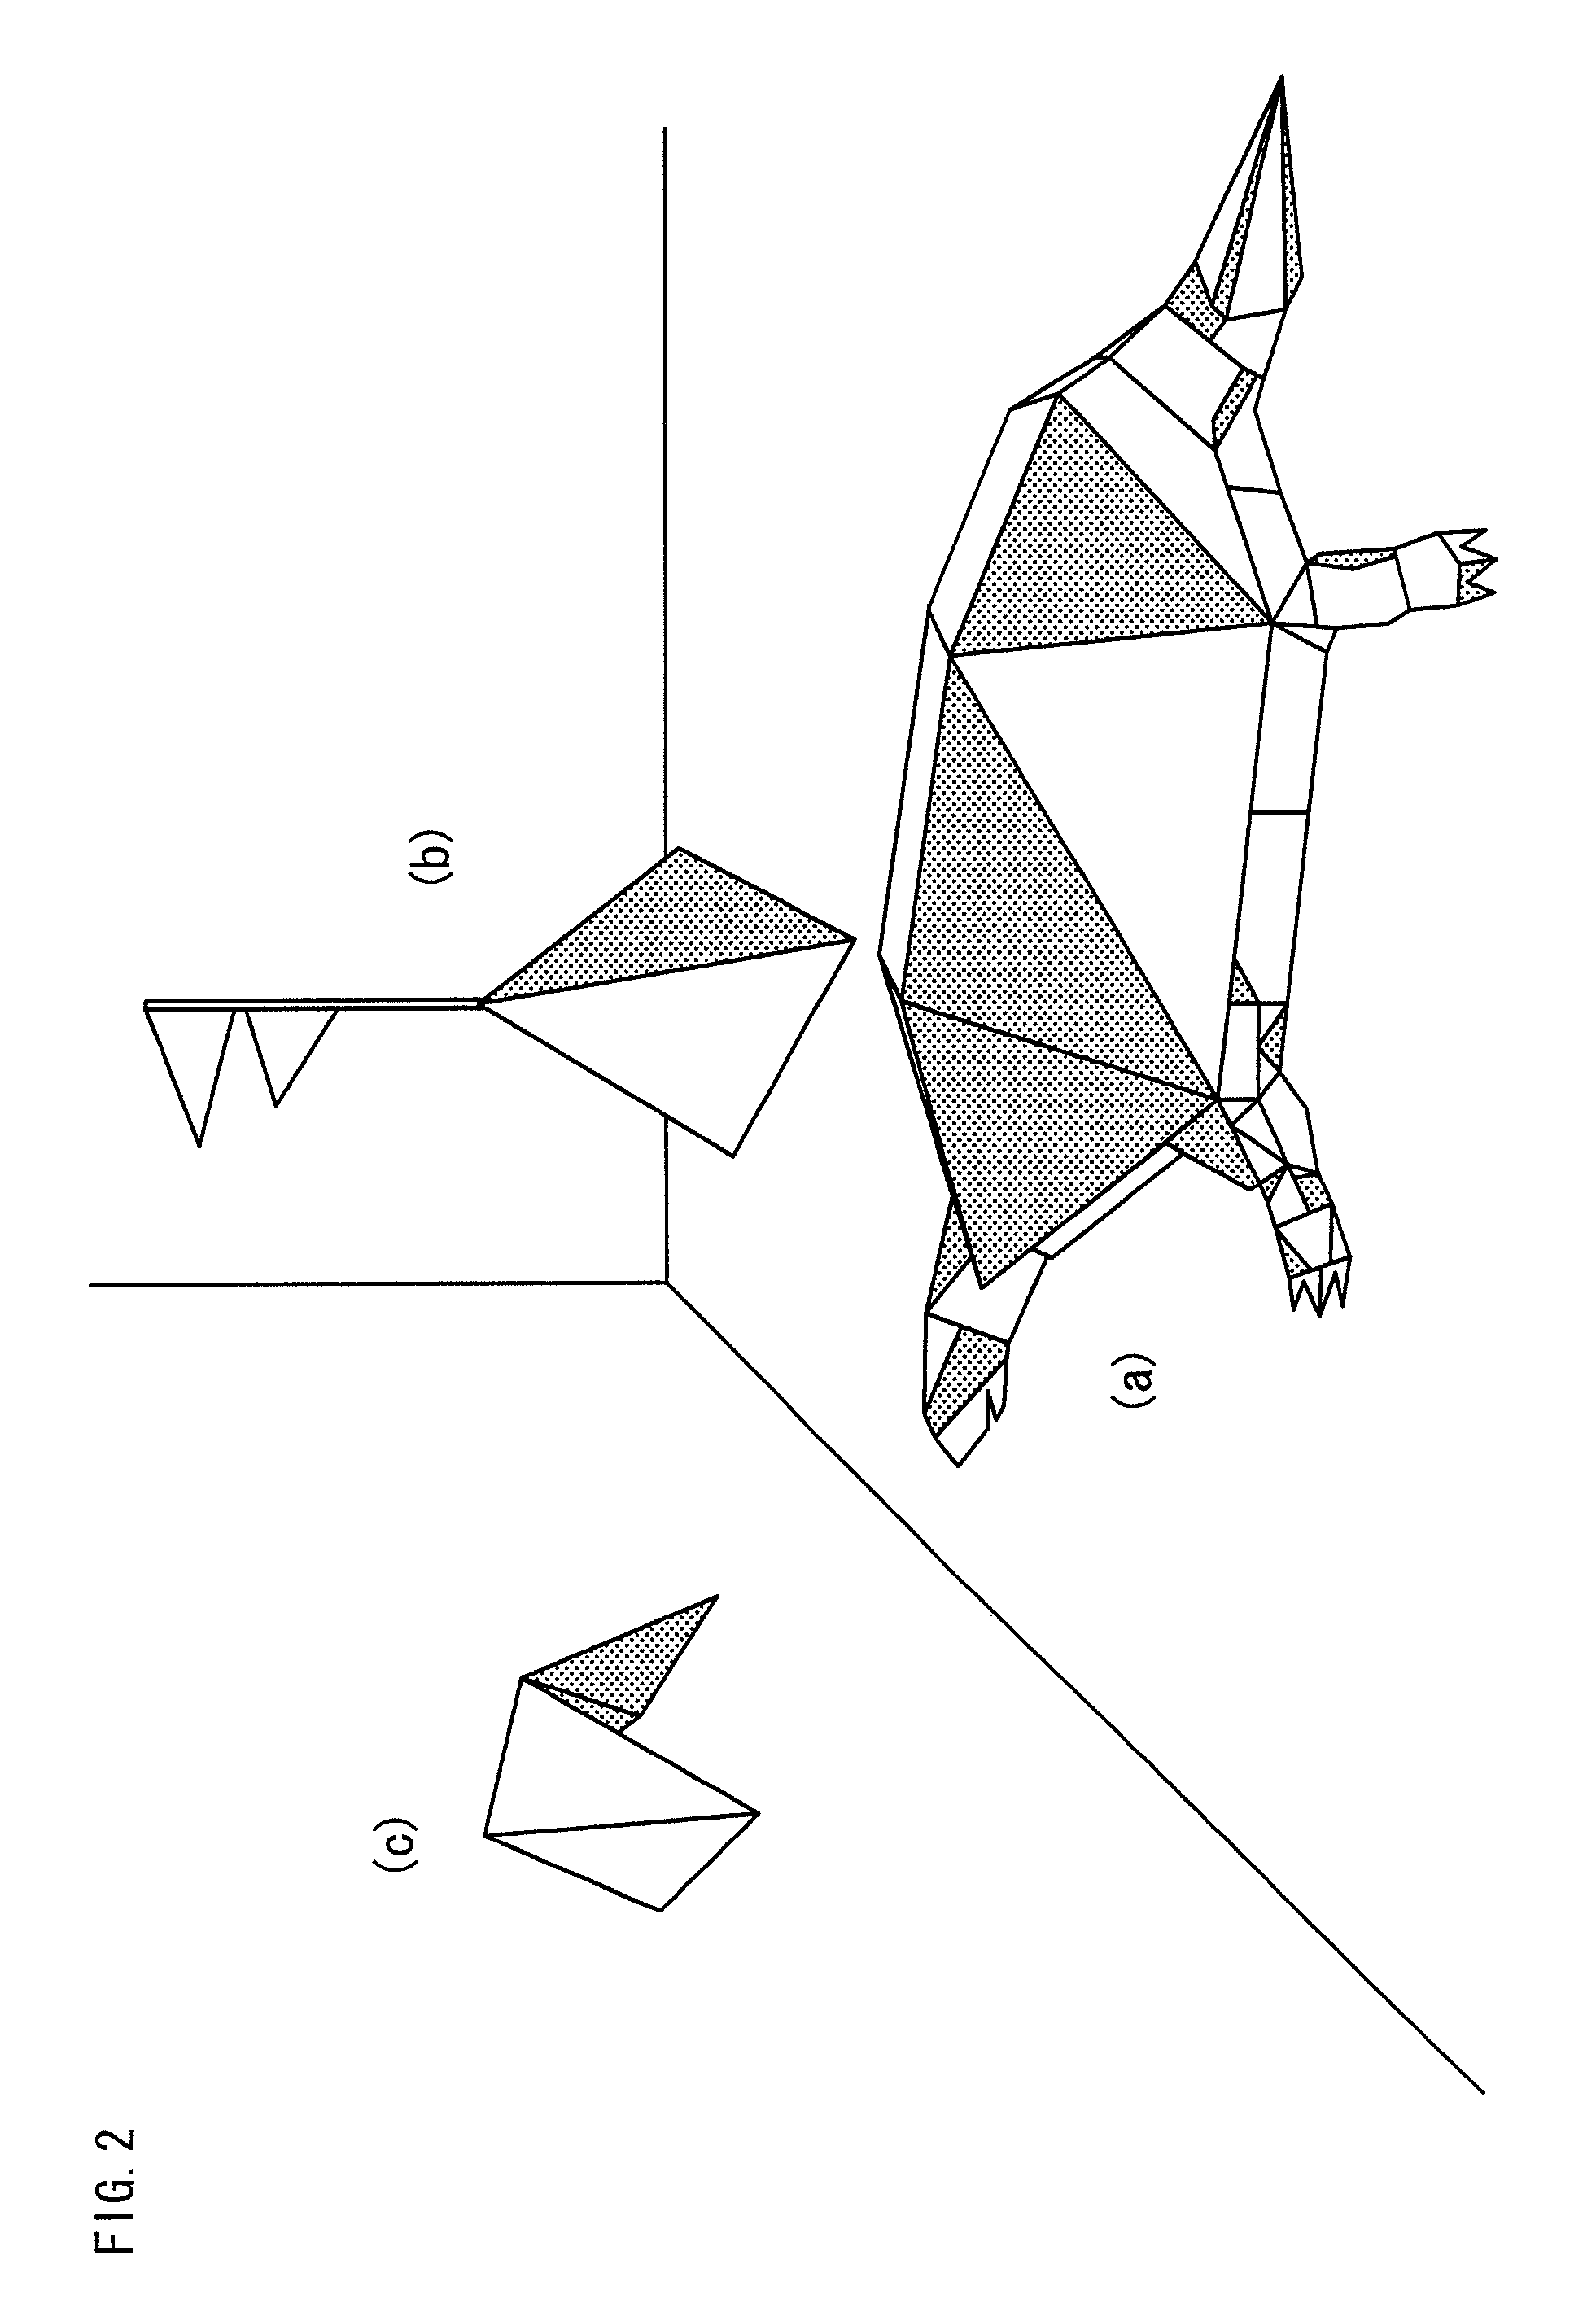 Processing device for processing plurality of polygon meshes, the device including plurality of processors for performing coordinate transformation and gradient calculations and an allocation unit to allocate each polygon to a respective processor